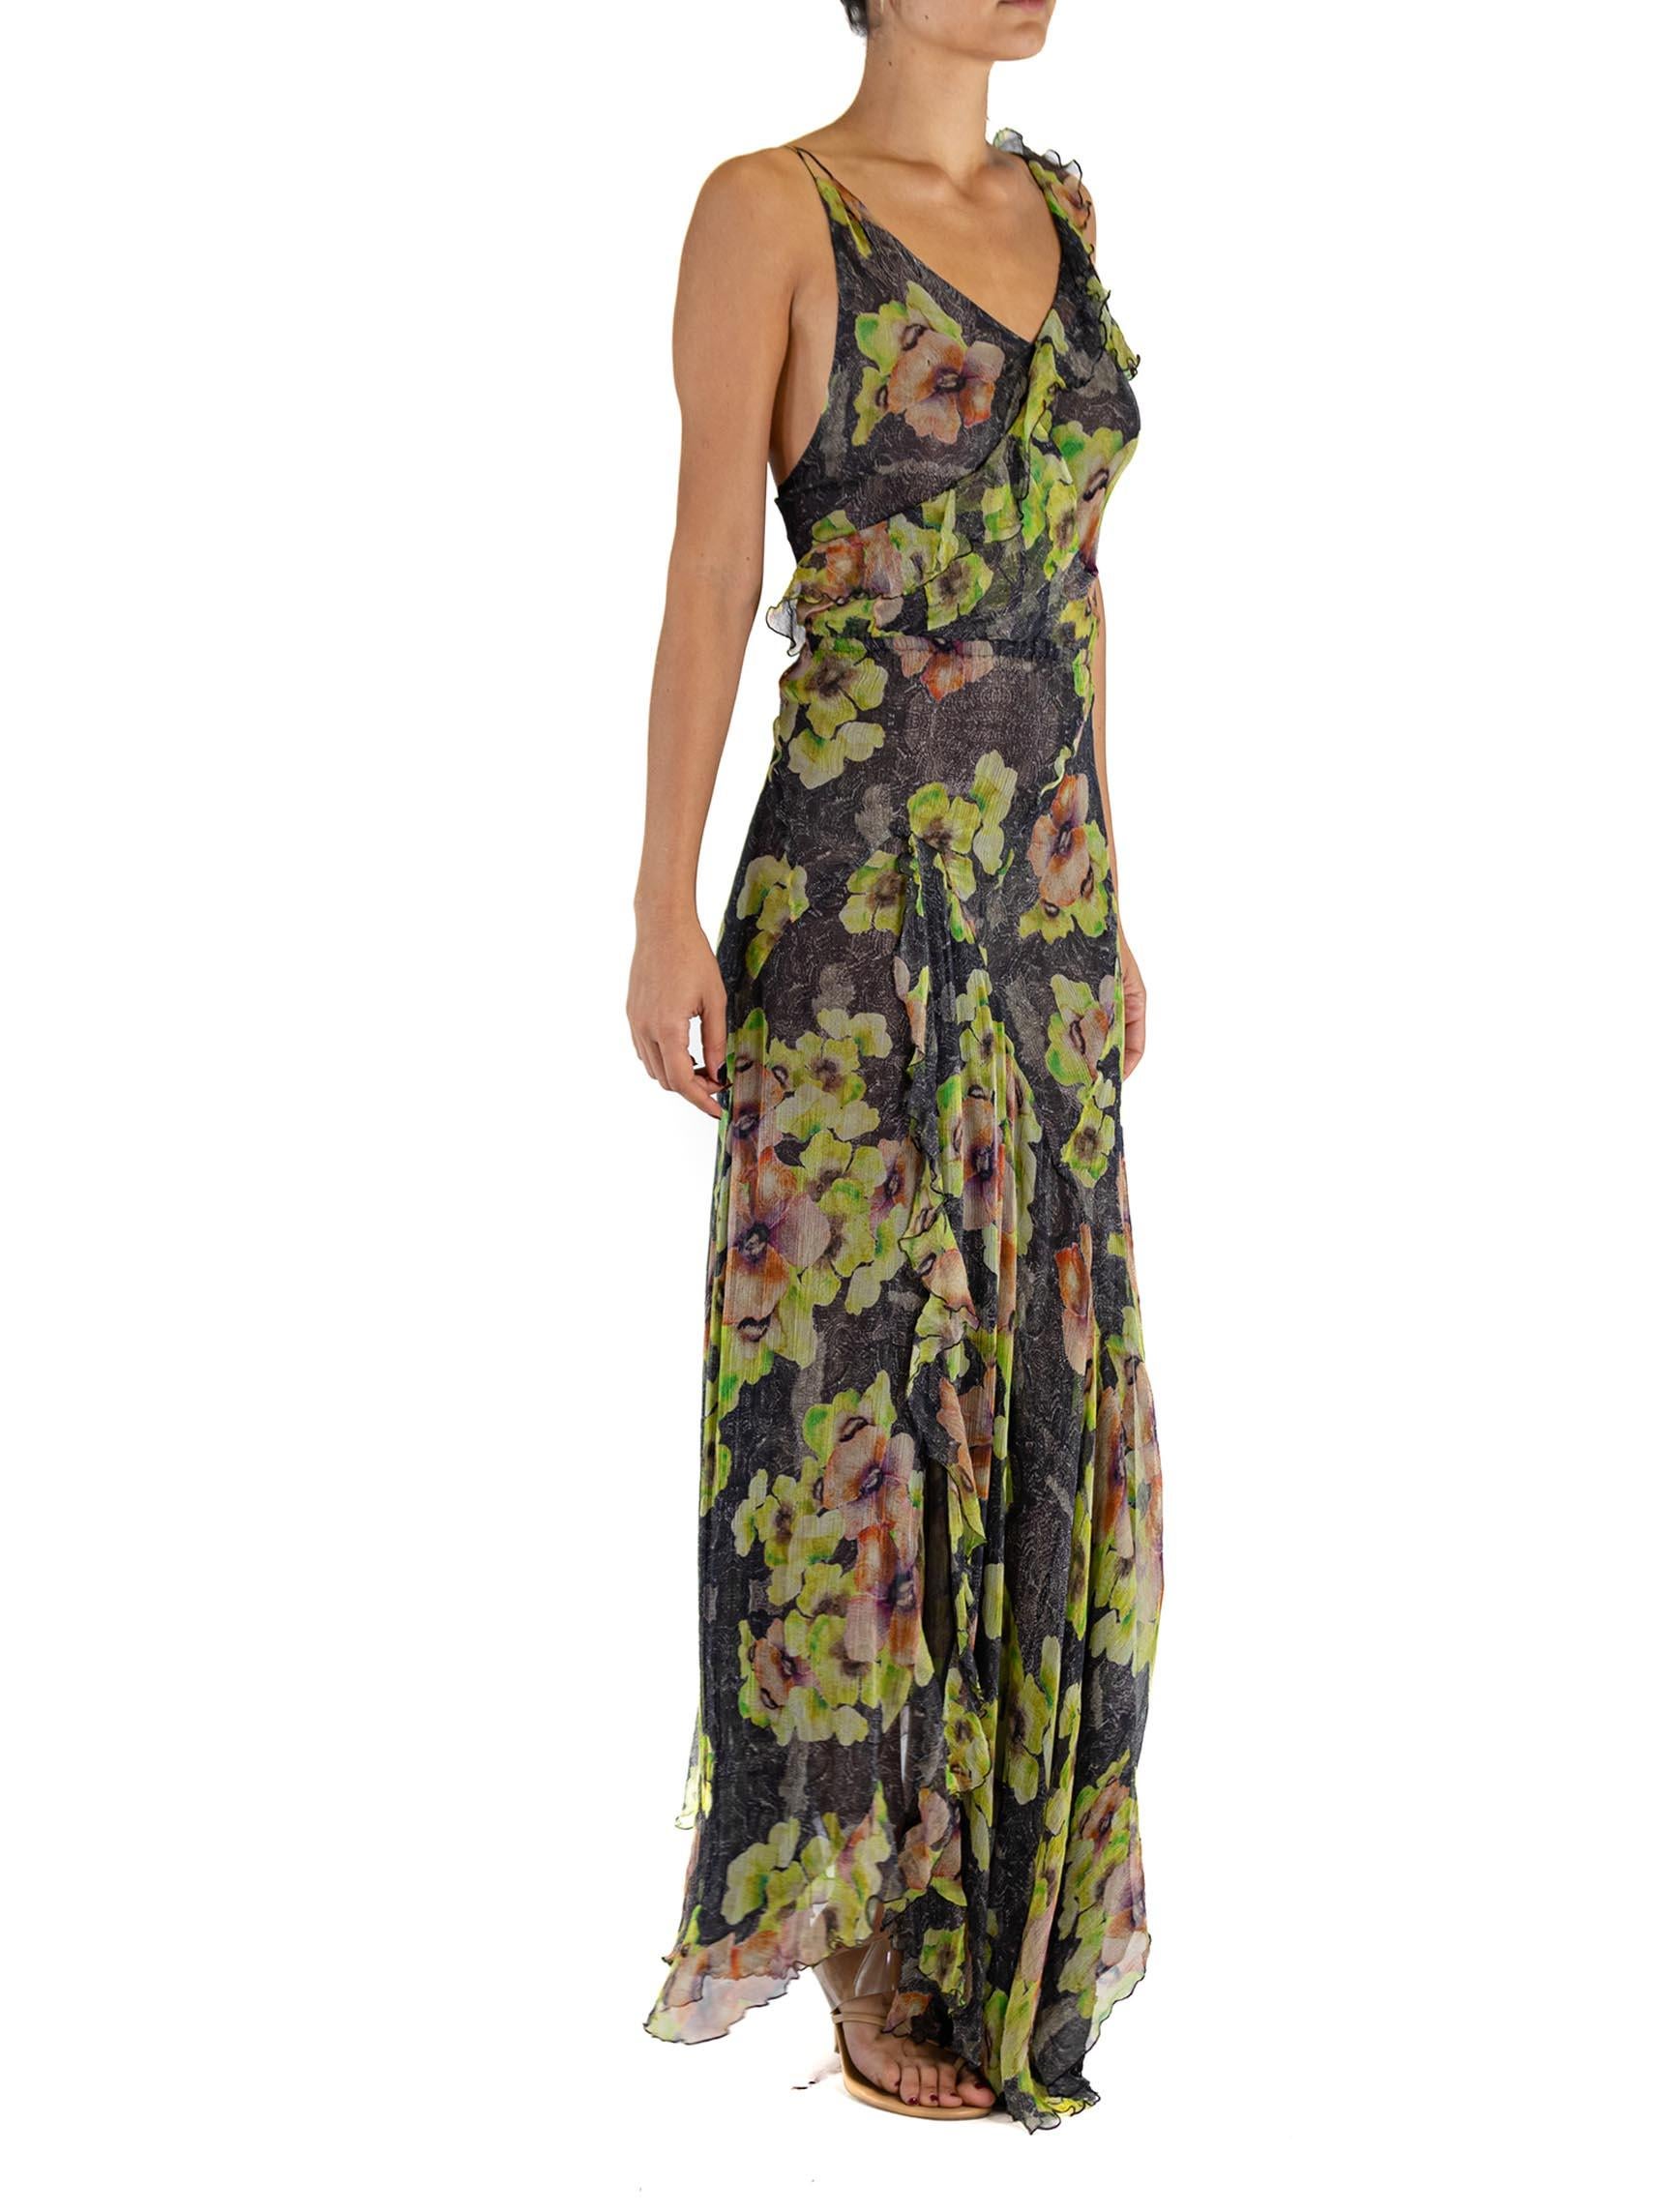 2000S ISABEL MARANT Black Bias Cut Silk Mousseline Ruffled Floral Gown In Excellent Condition For Sale In New York, NY